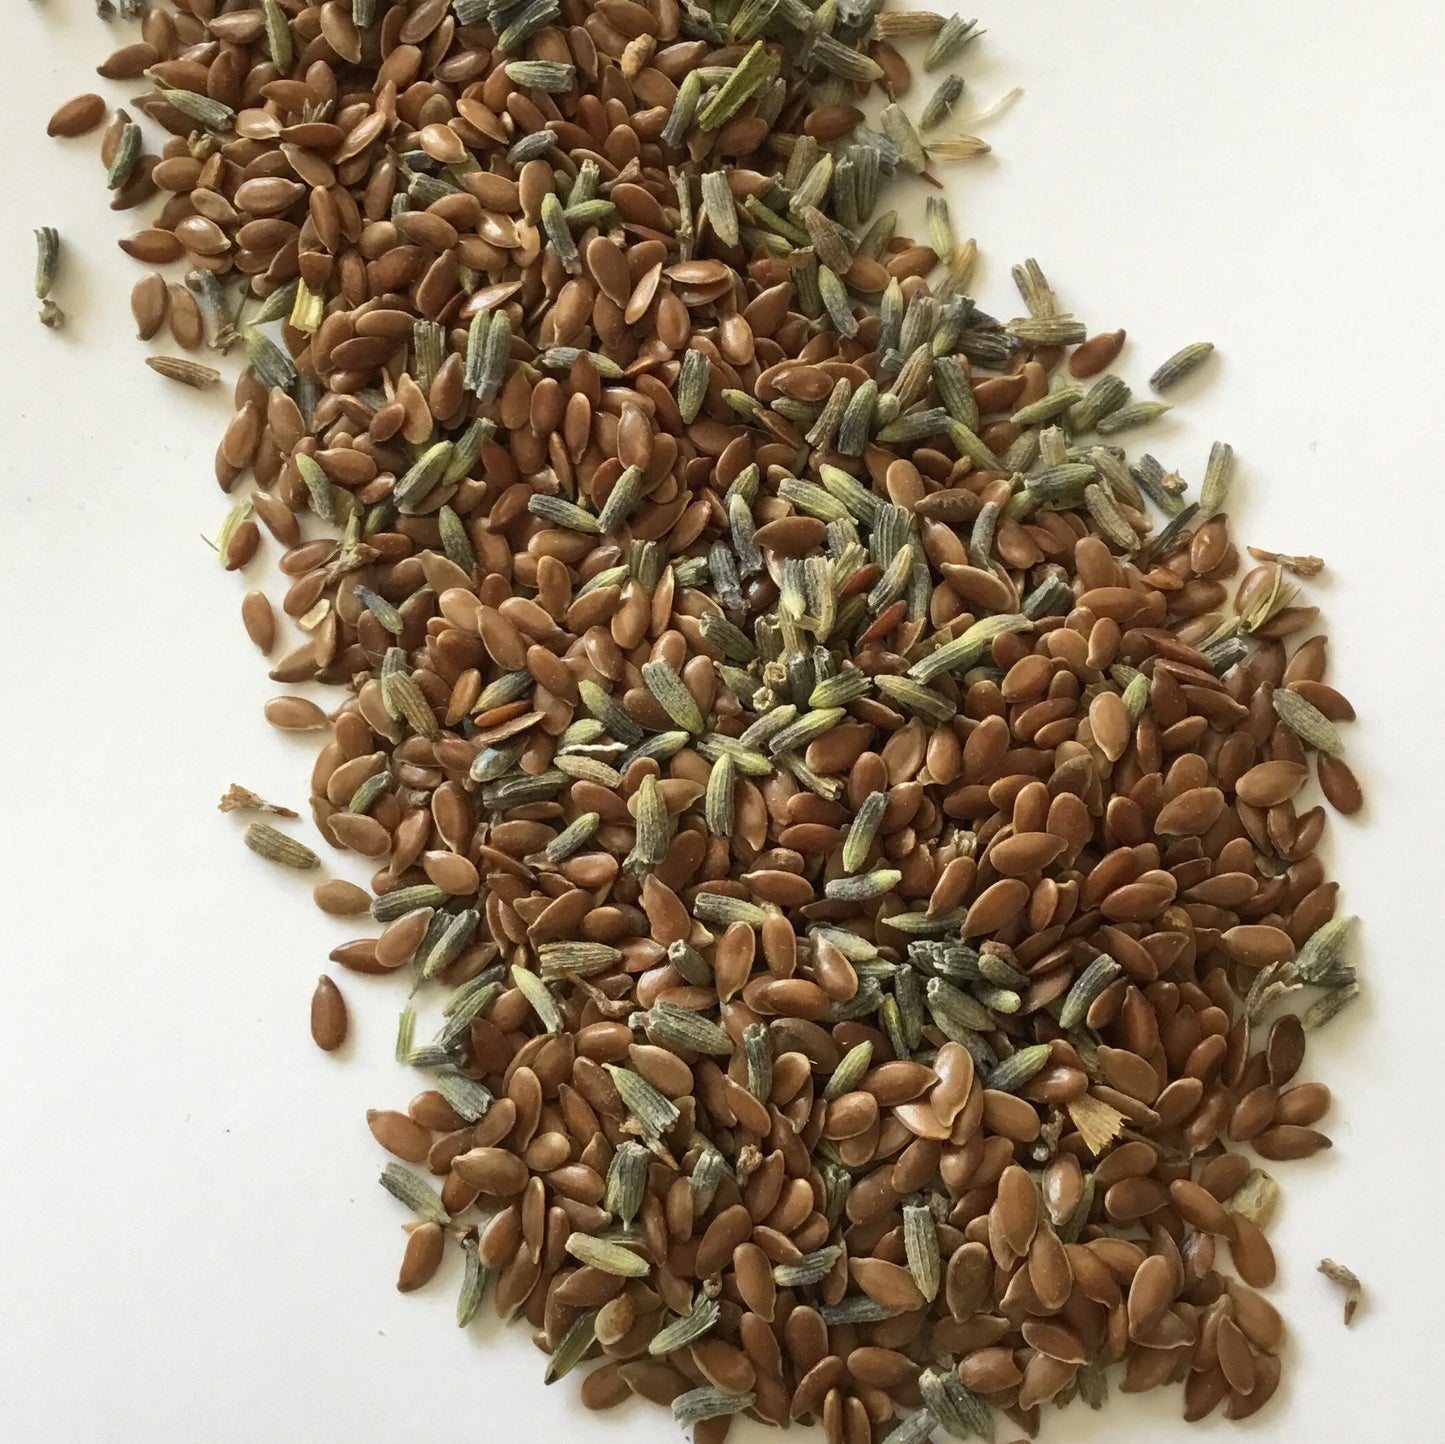 brown flax seed and dried English lavender bud filling for eye pillows and sleep masks